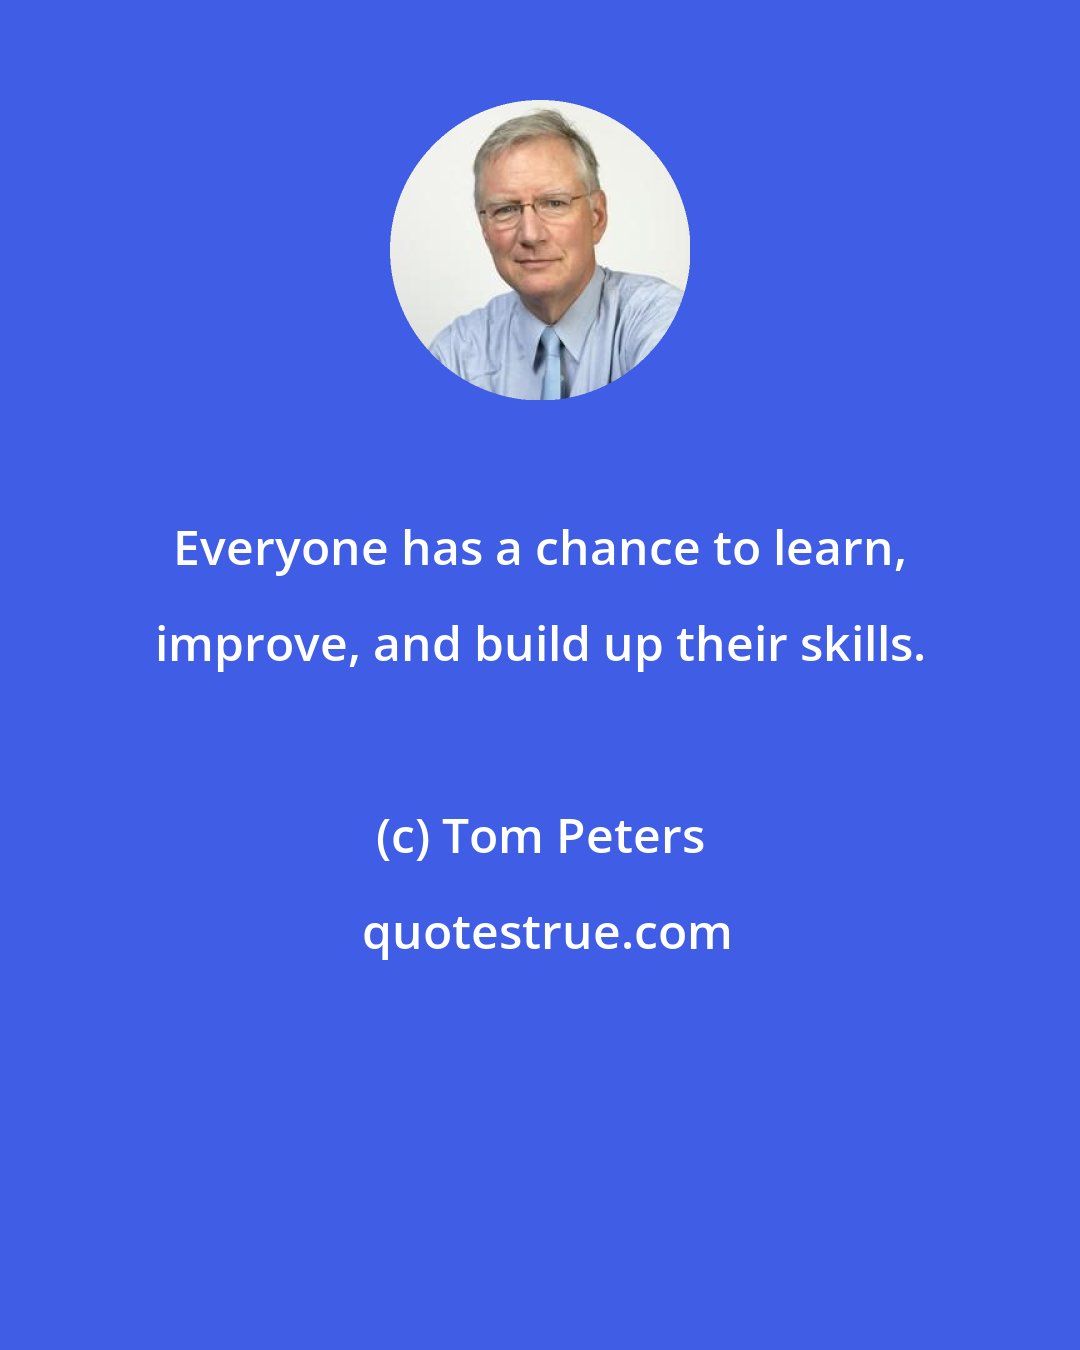 Tom Peters: Everyone has a chance to learn, improve, and build up their skills.